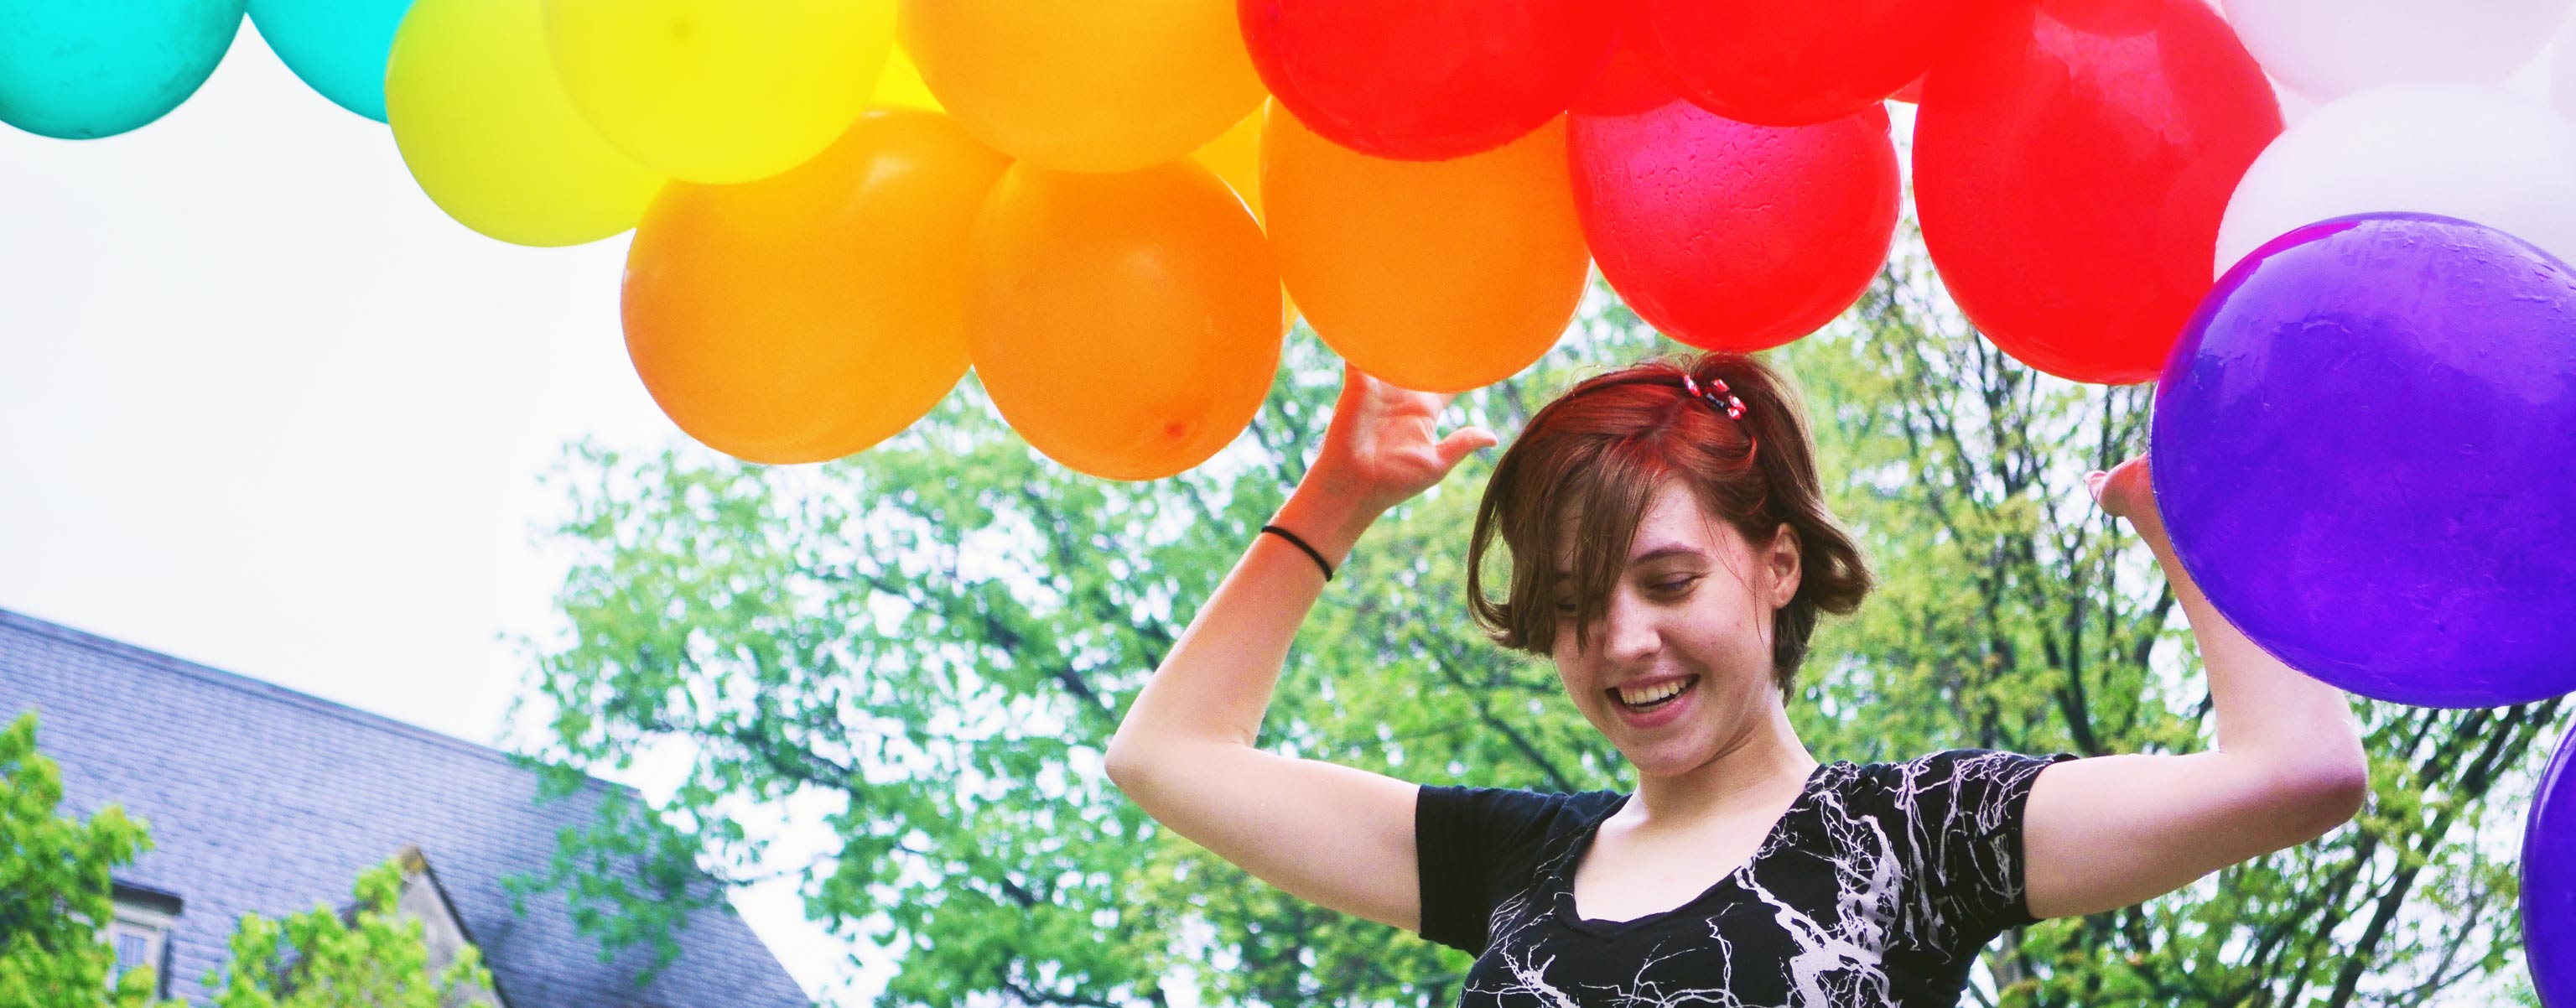 Brunette female student smiles while holding a large bunch of colorful balloons